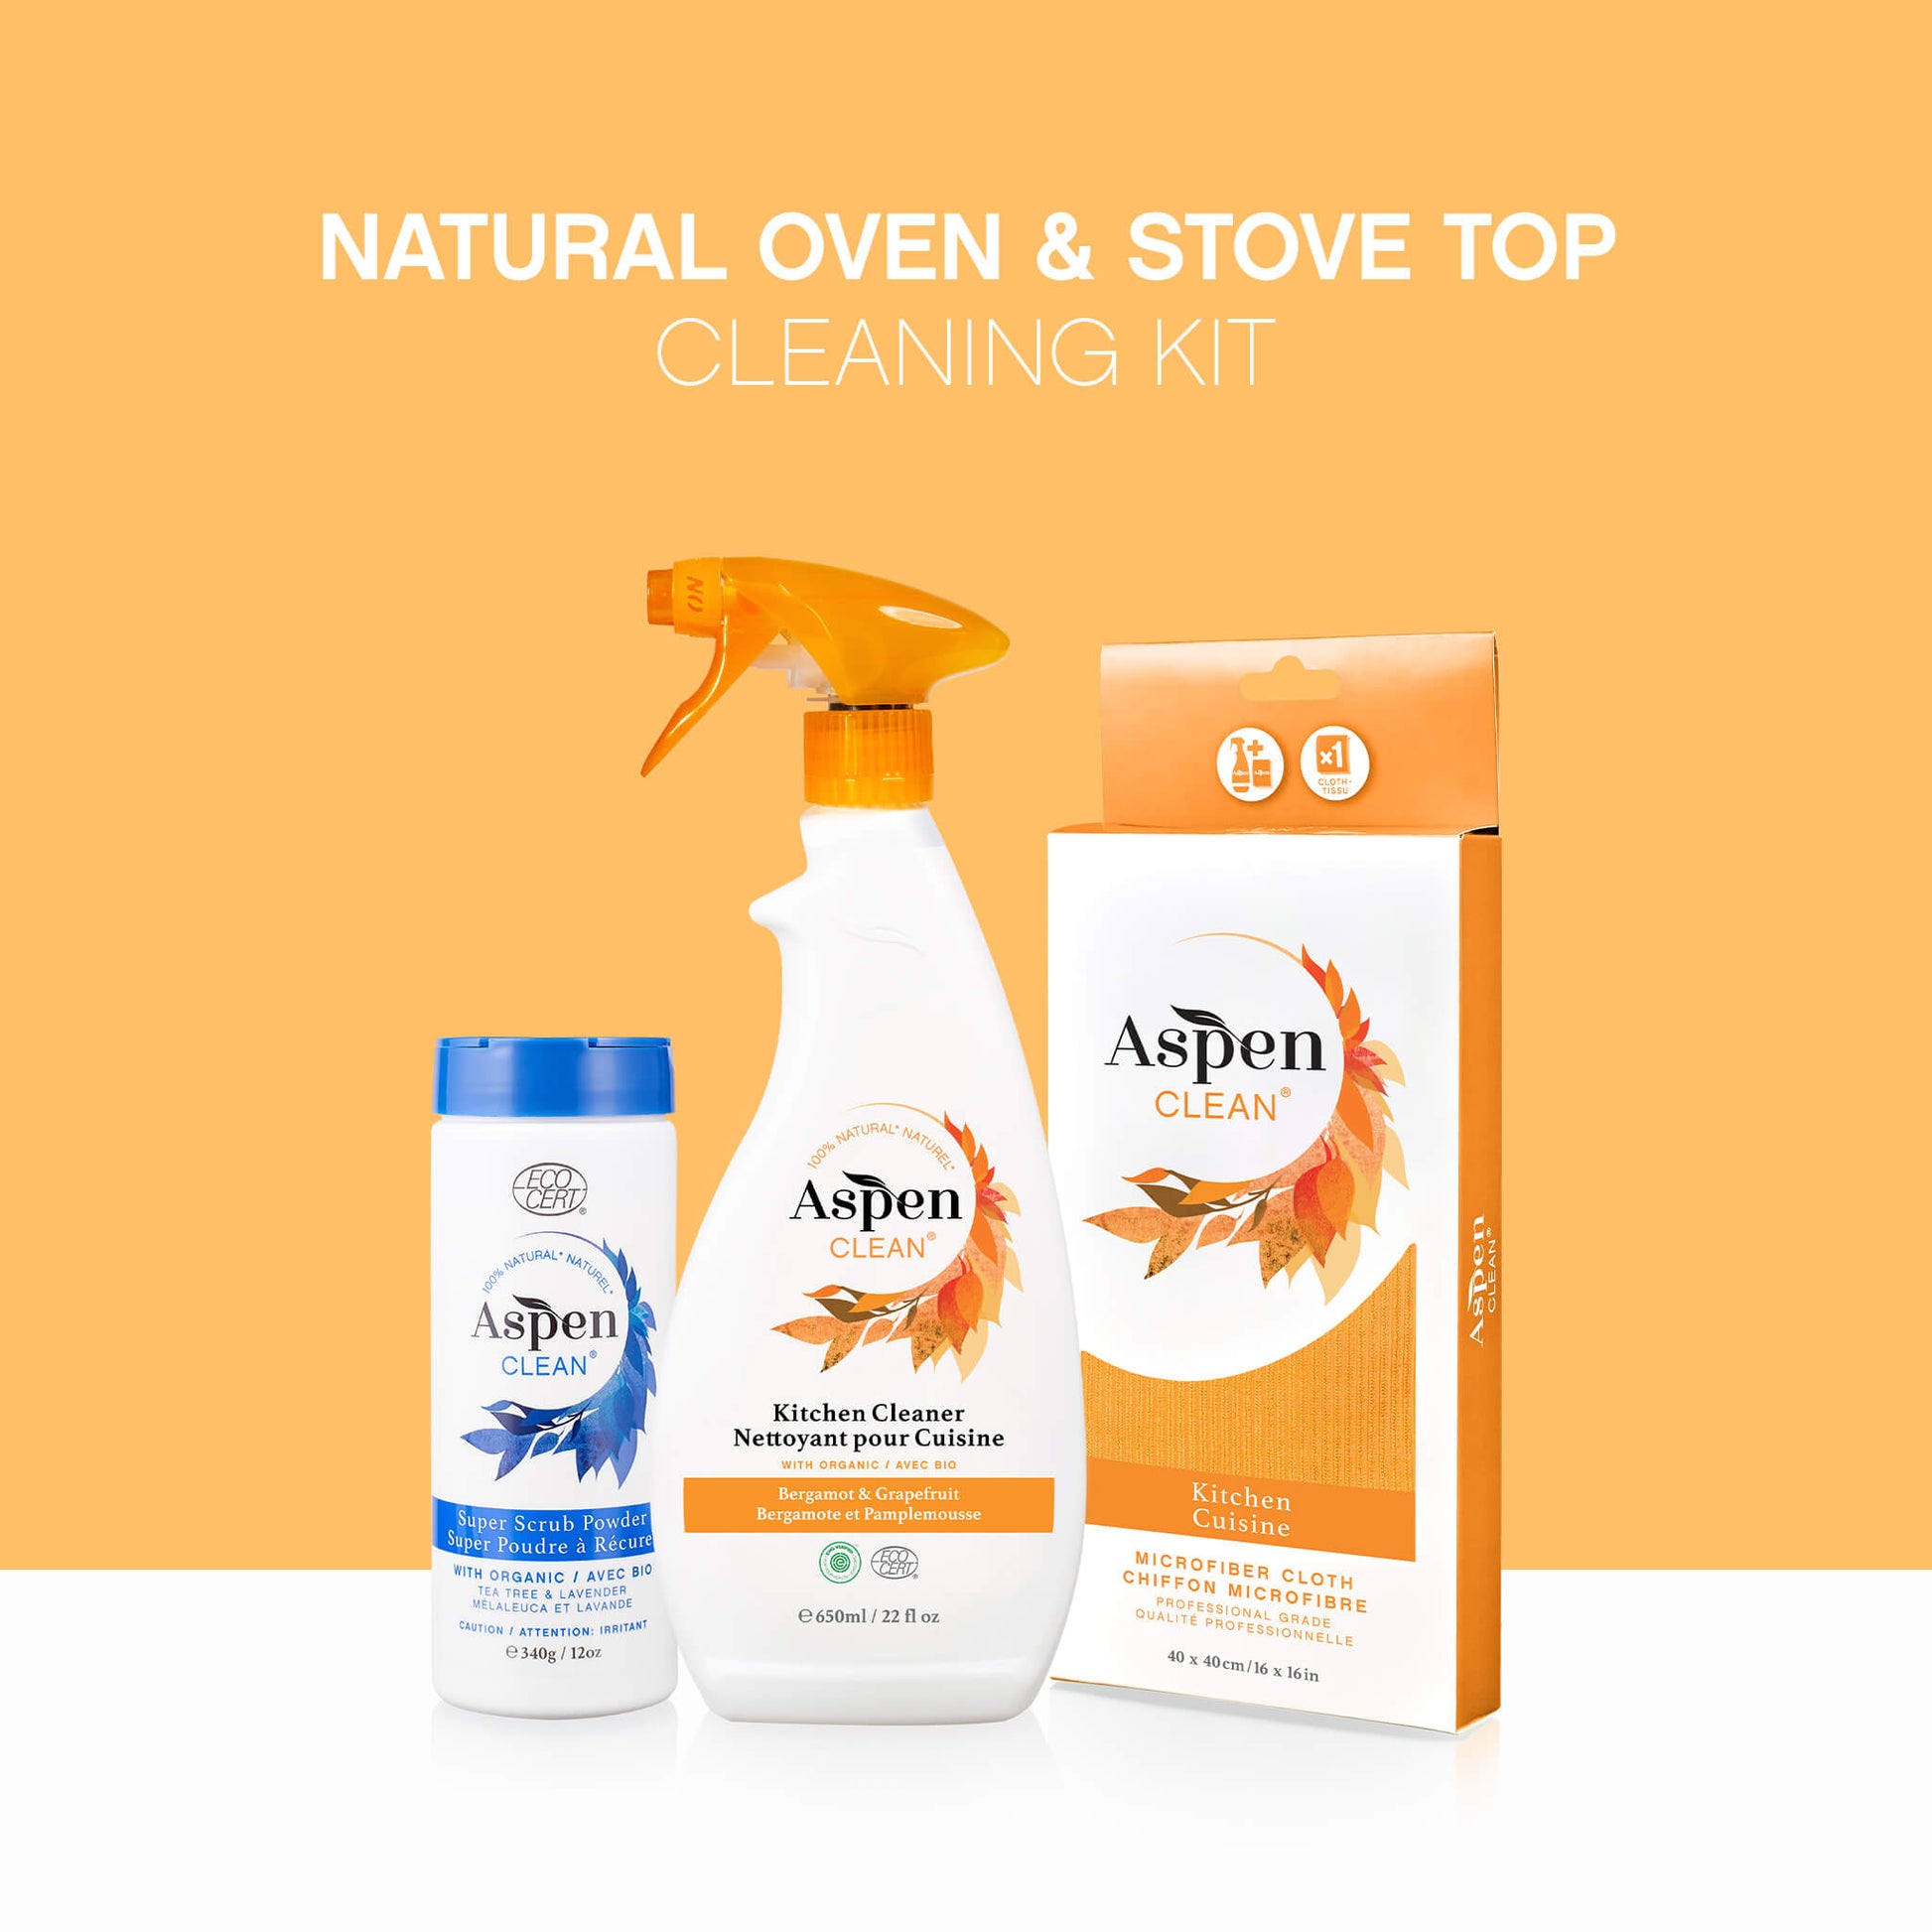 Oven and Stove top Cleaning Kit